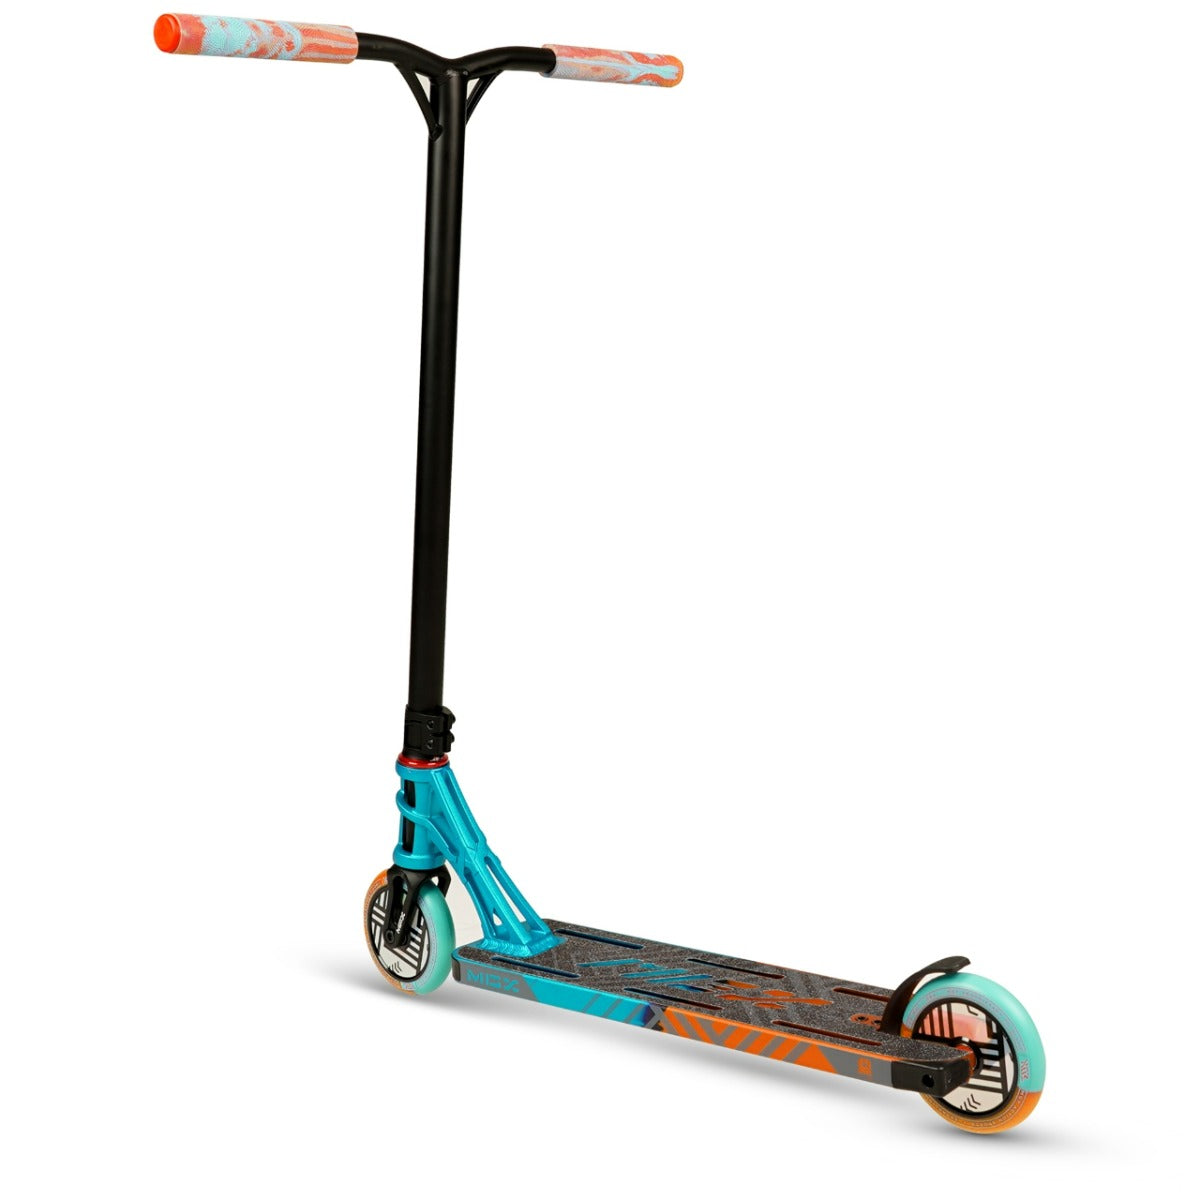 Madd Gear MGP MGX T2 Team Limited Edition Complete Stunt Scooter - Lush - Left